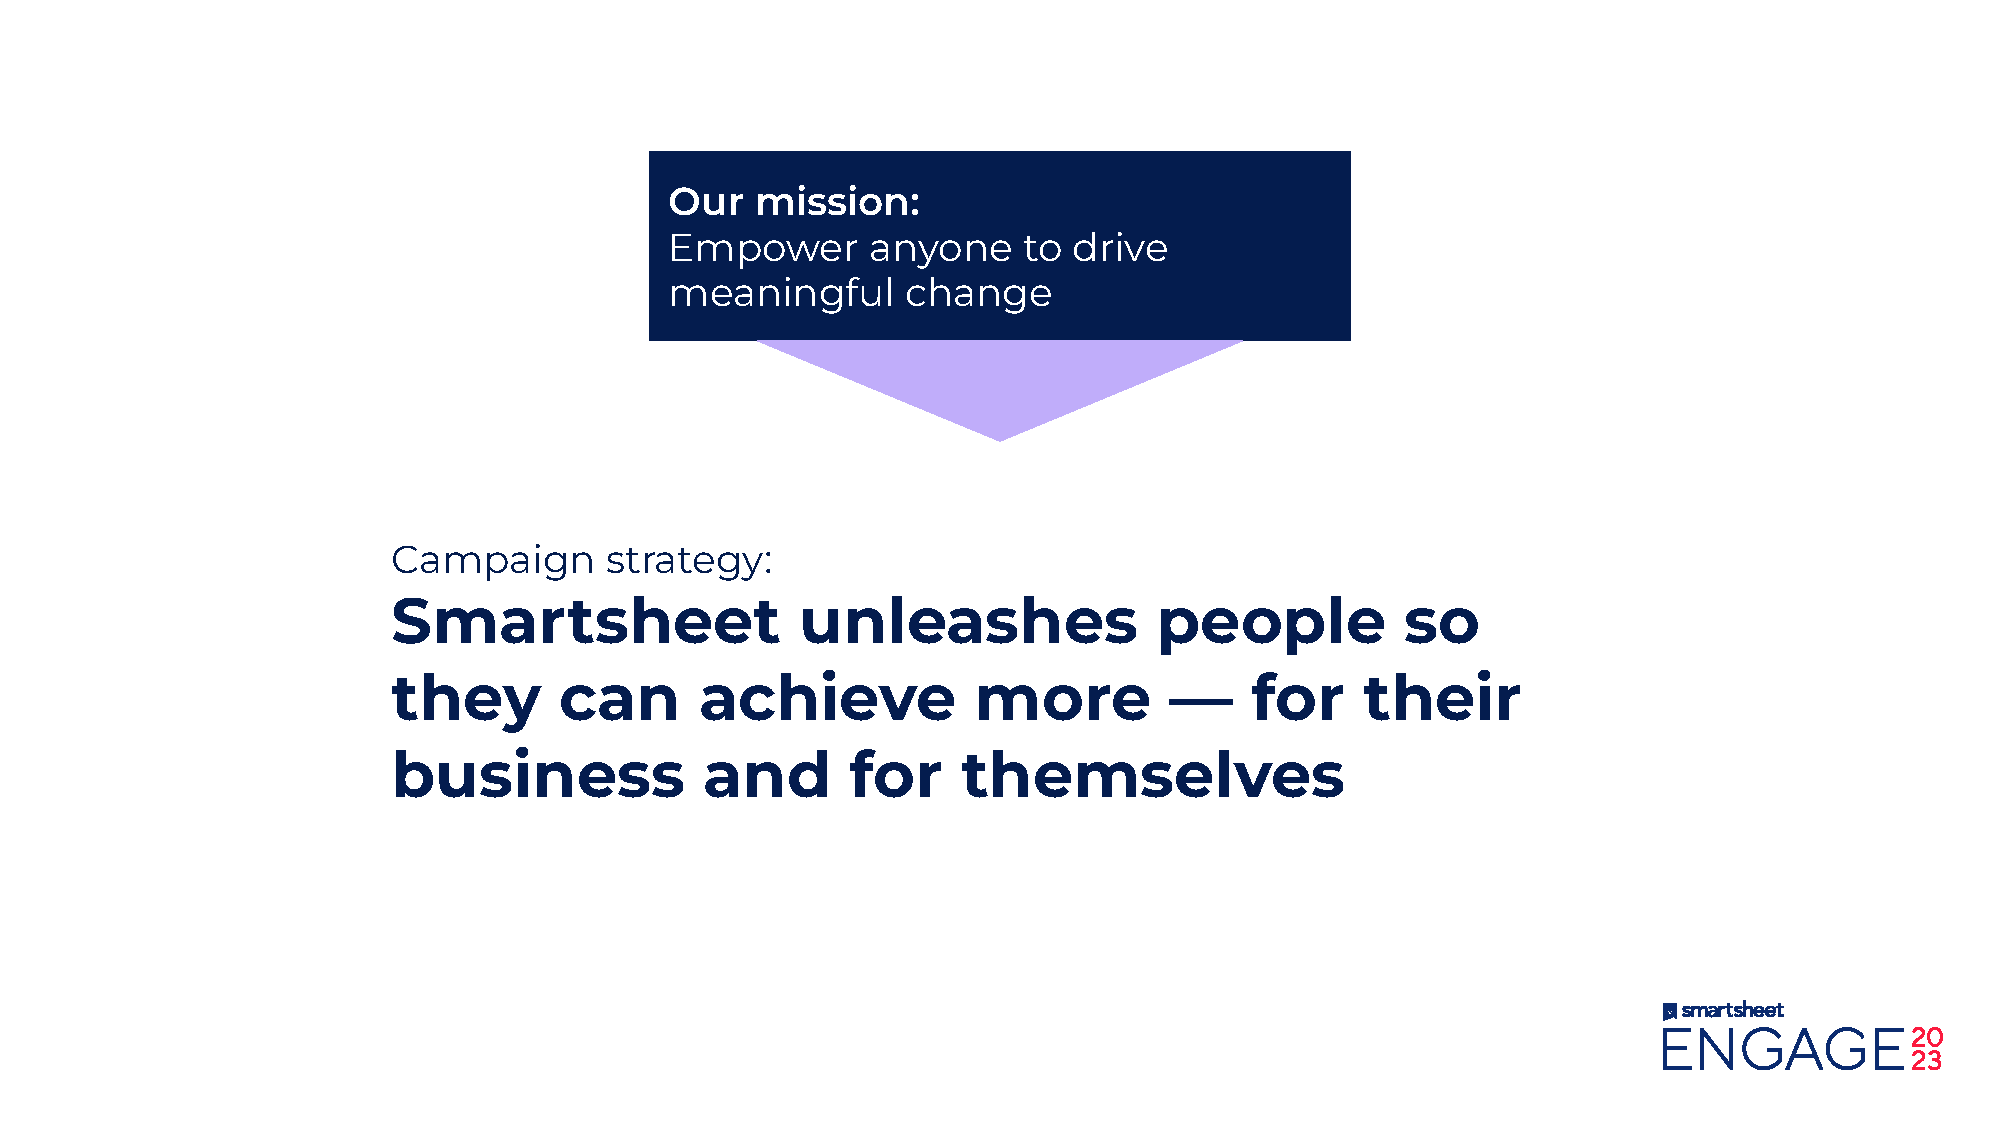 Powerpoint slide: Smartsheet unleashes people so they can achieve more - for their business and for themselves